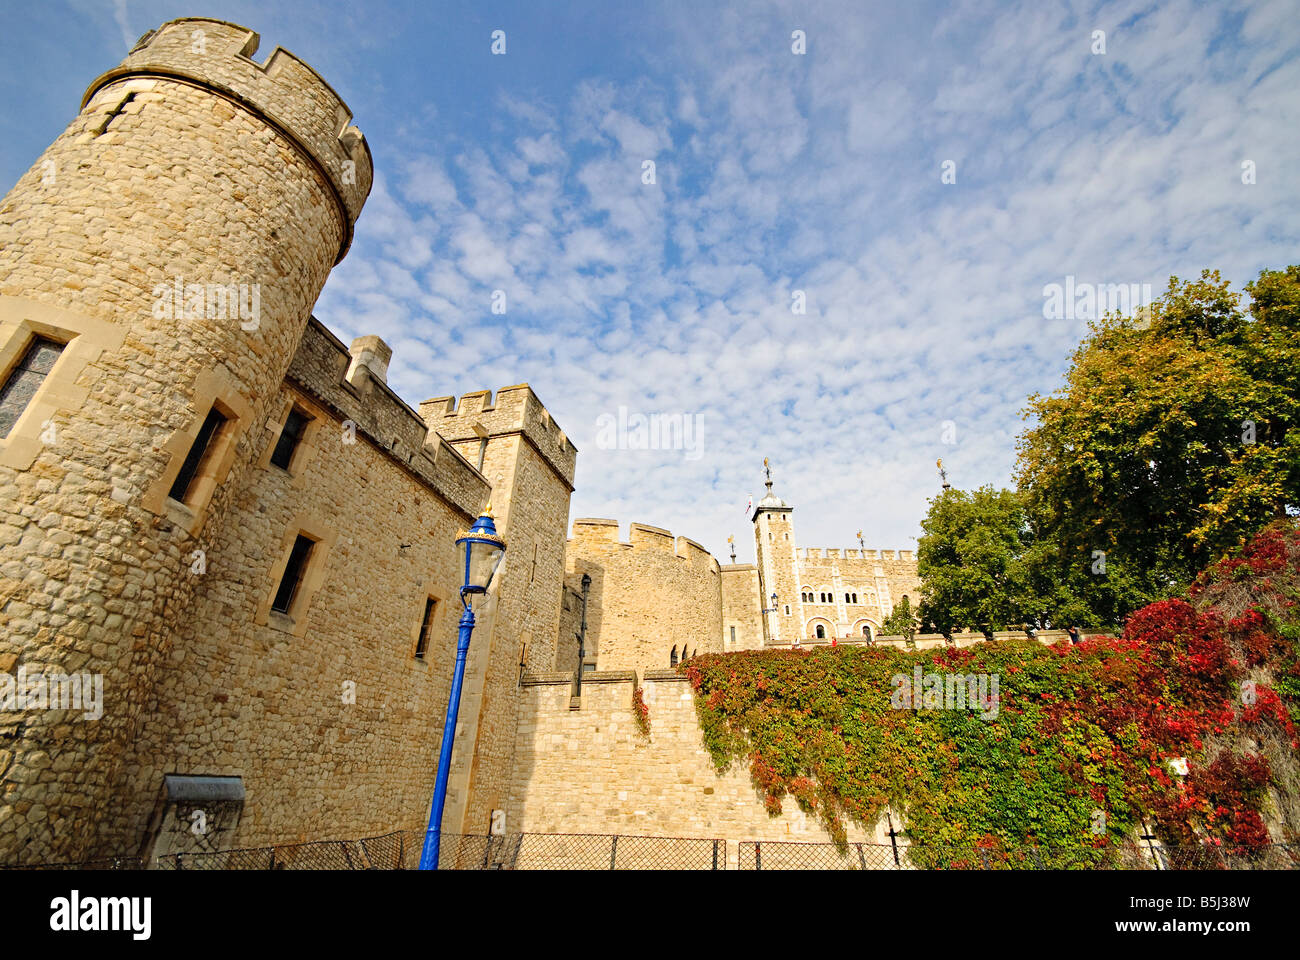 LONDON, UK - Exterior fortifications around the Tower of London Stock Photo